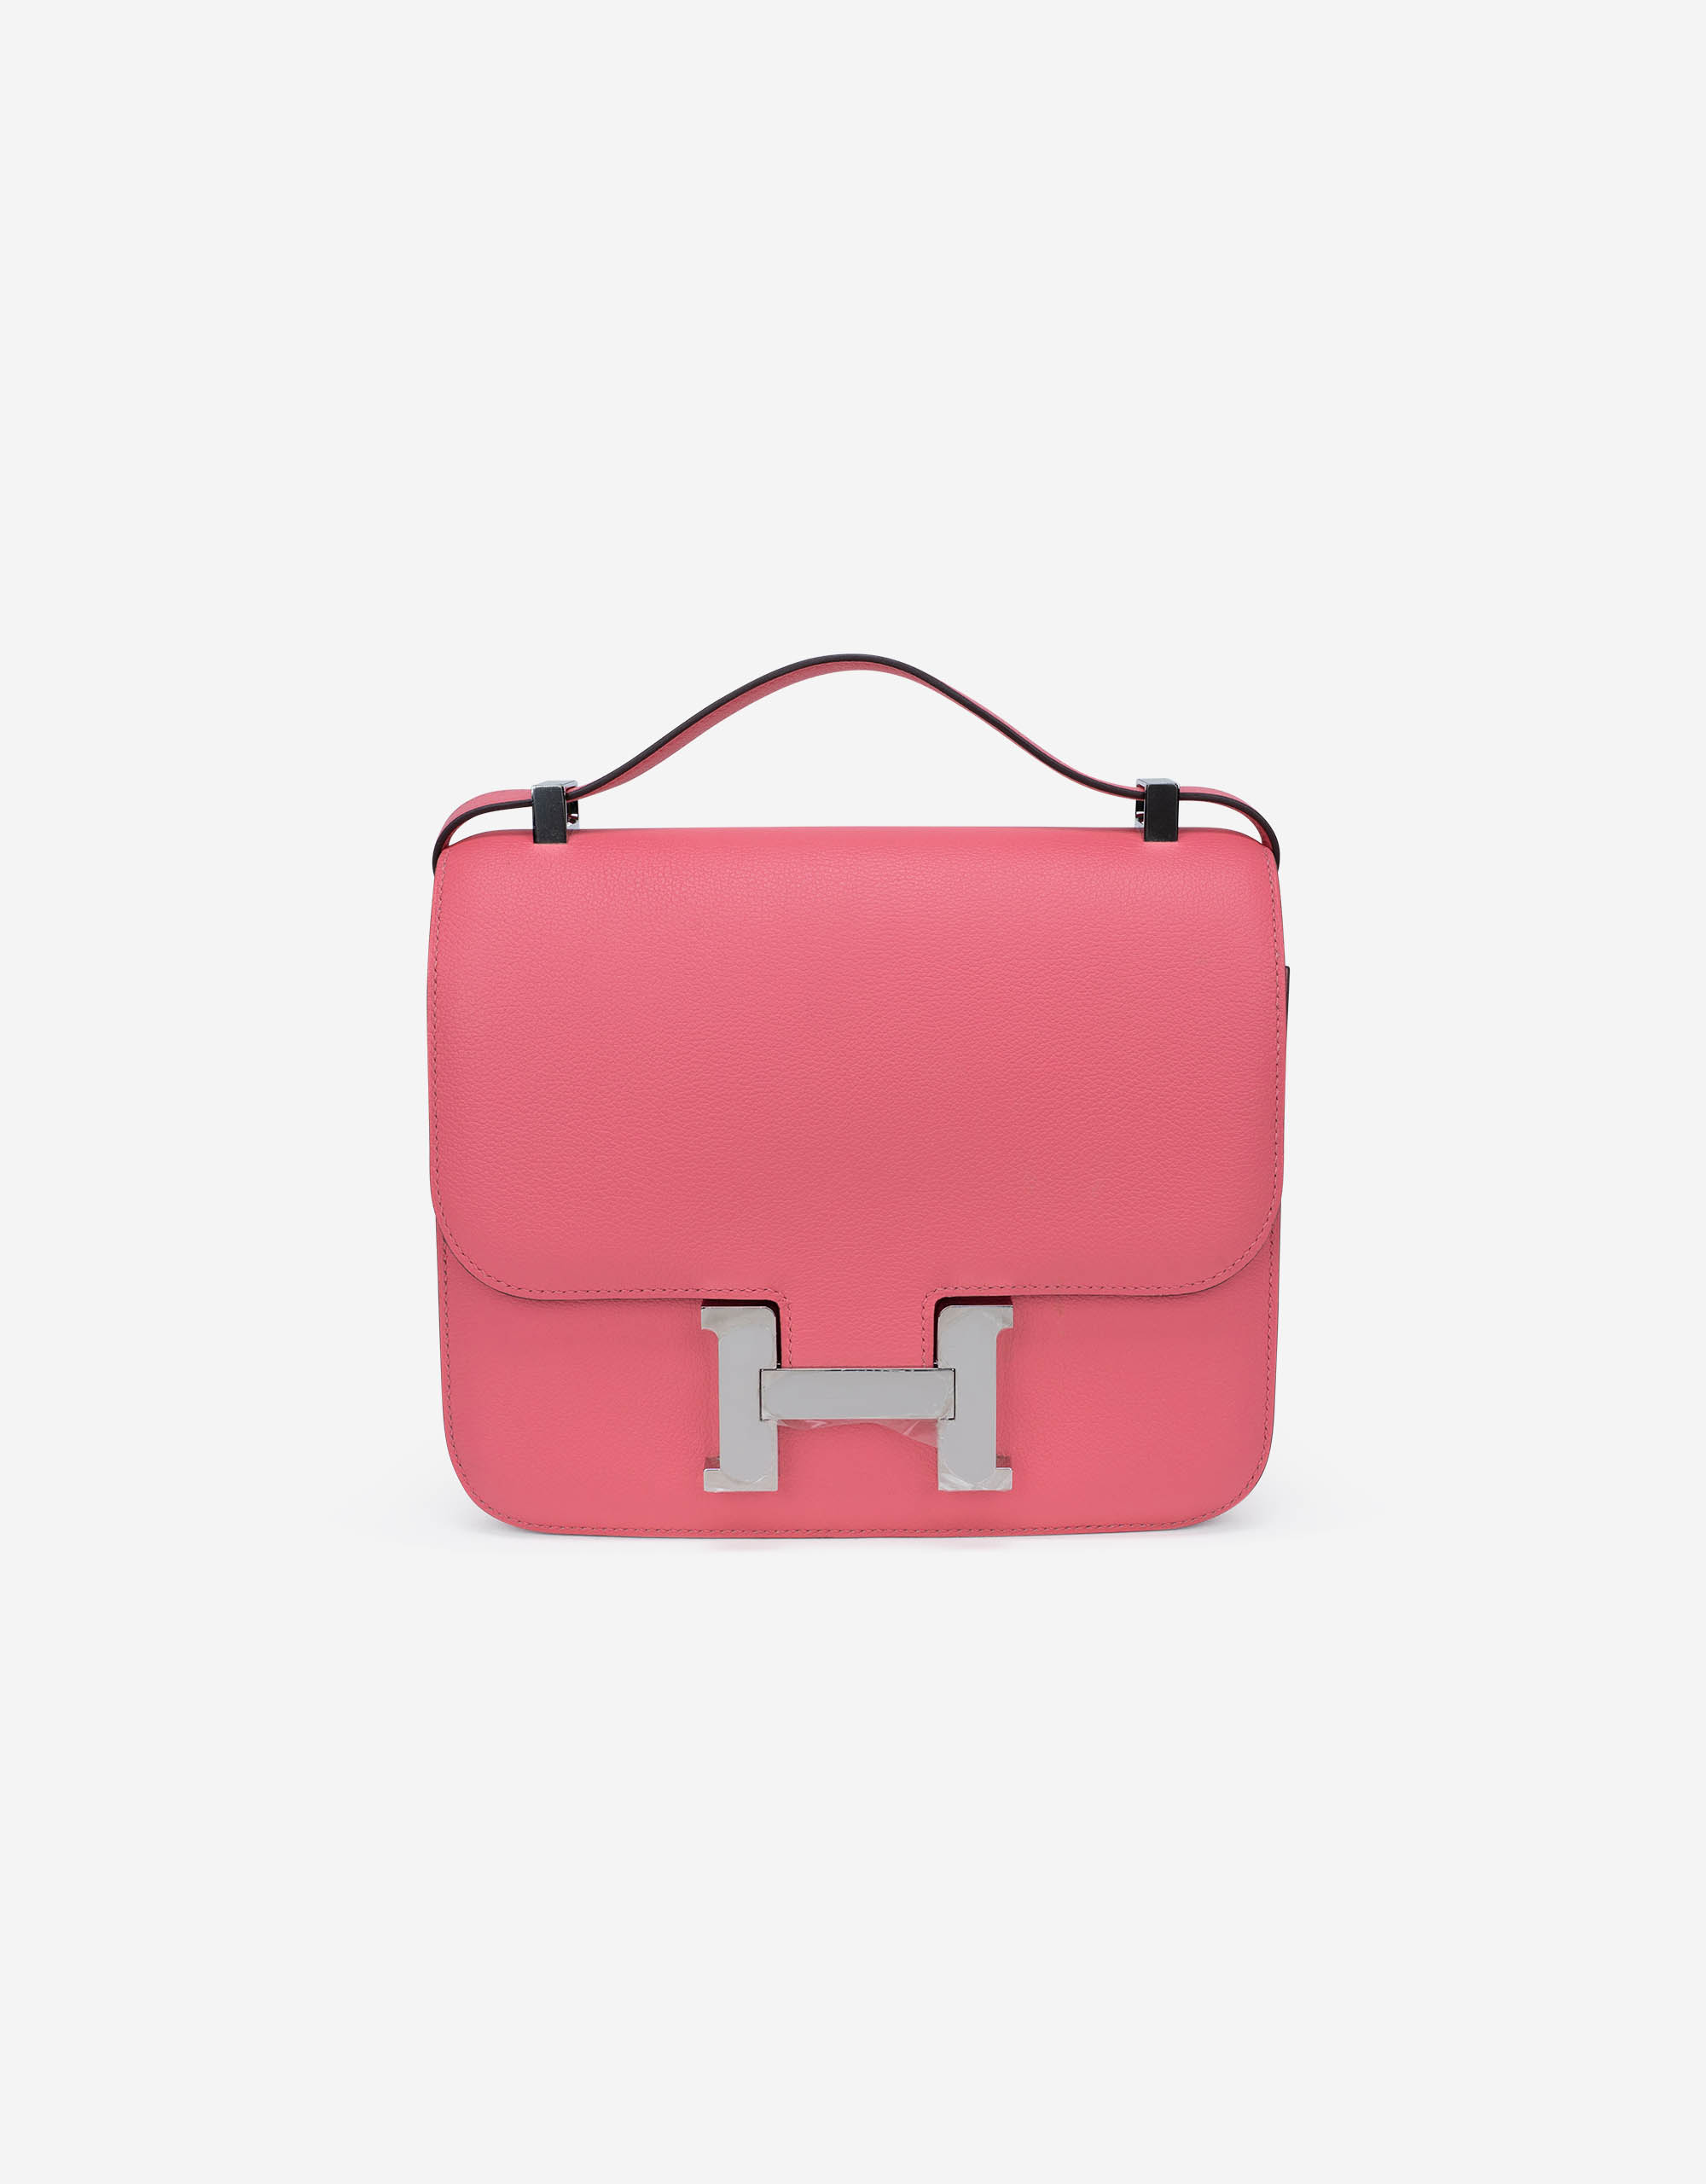 Hermès Rose Azalee Constance 24cm of Evercolor leather with